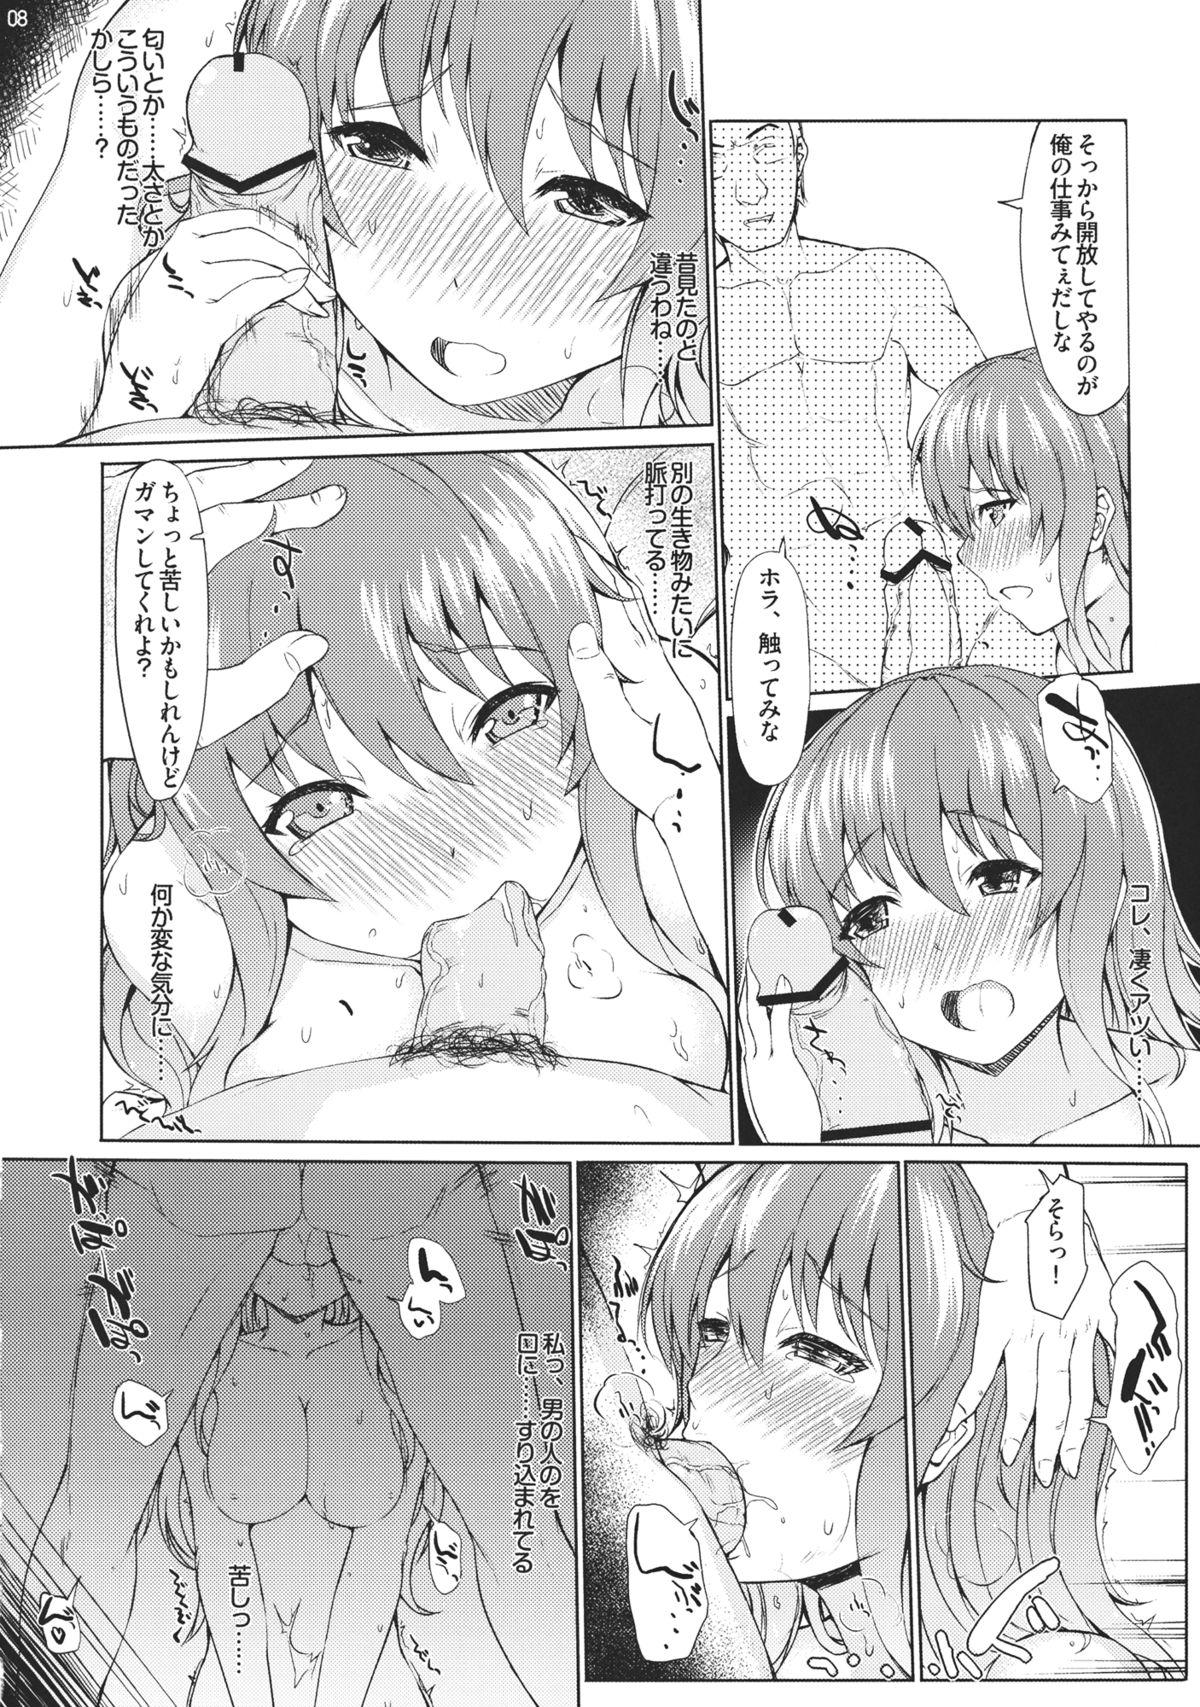 Blowjob NORMA JEAN - Touhou project Gayporn - Page 8